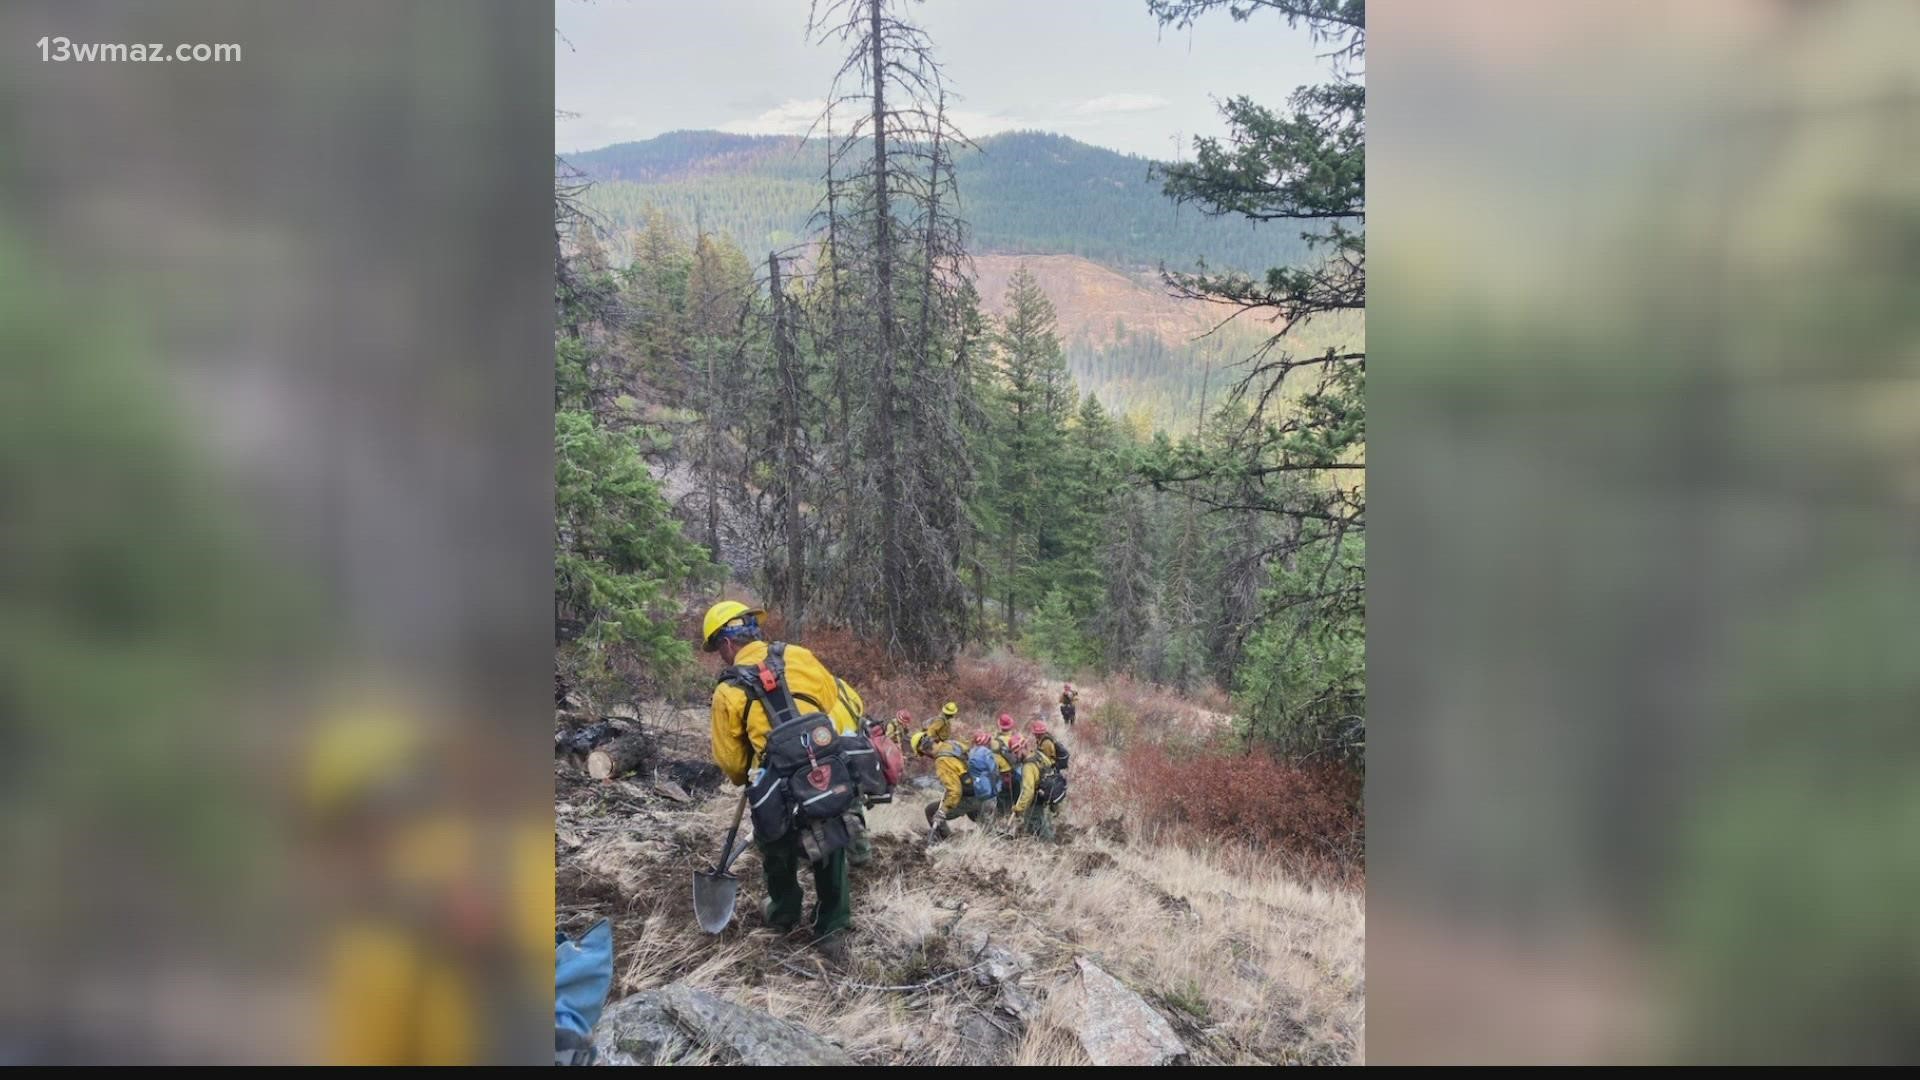 The wildland firefighters spent two weeks in the West